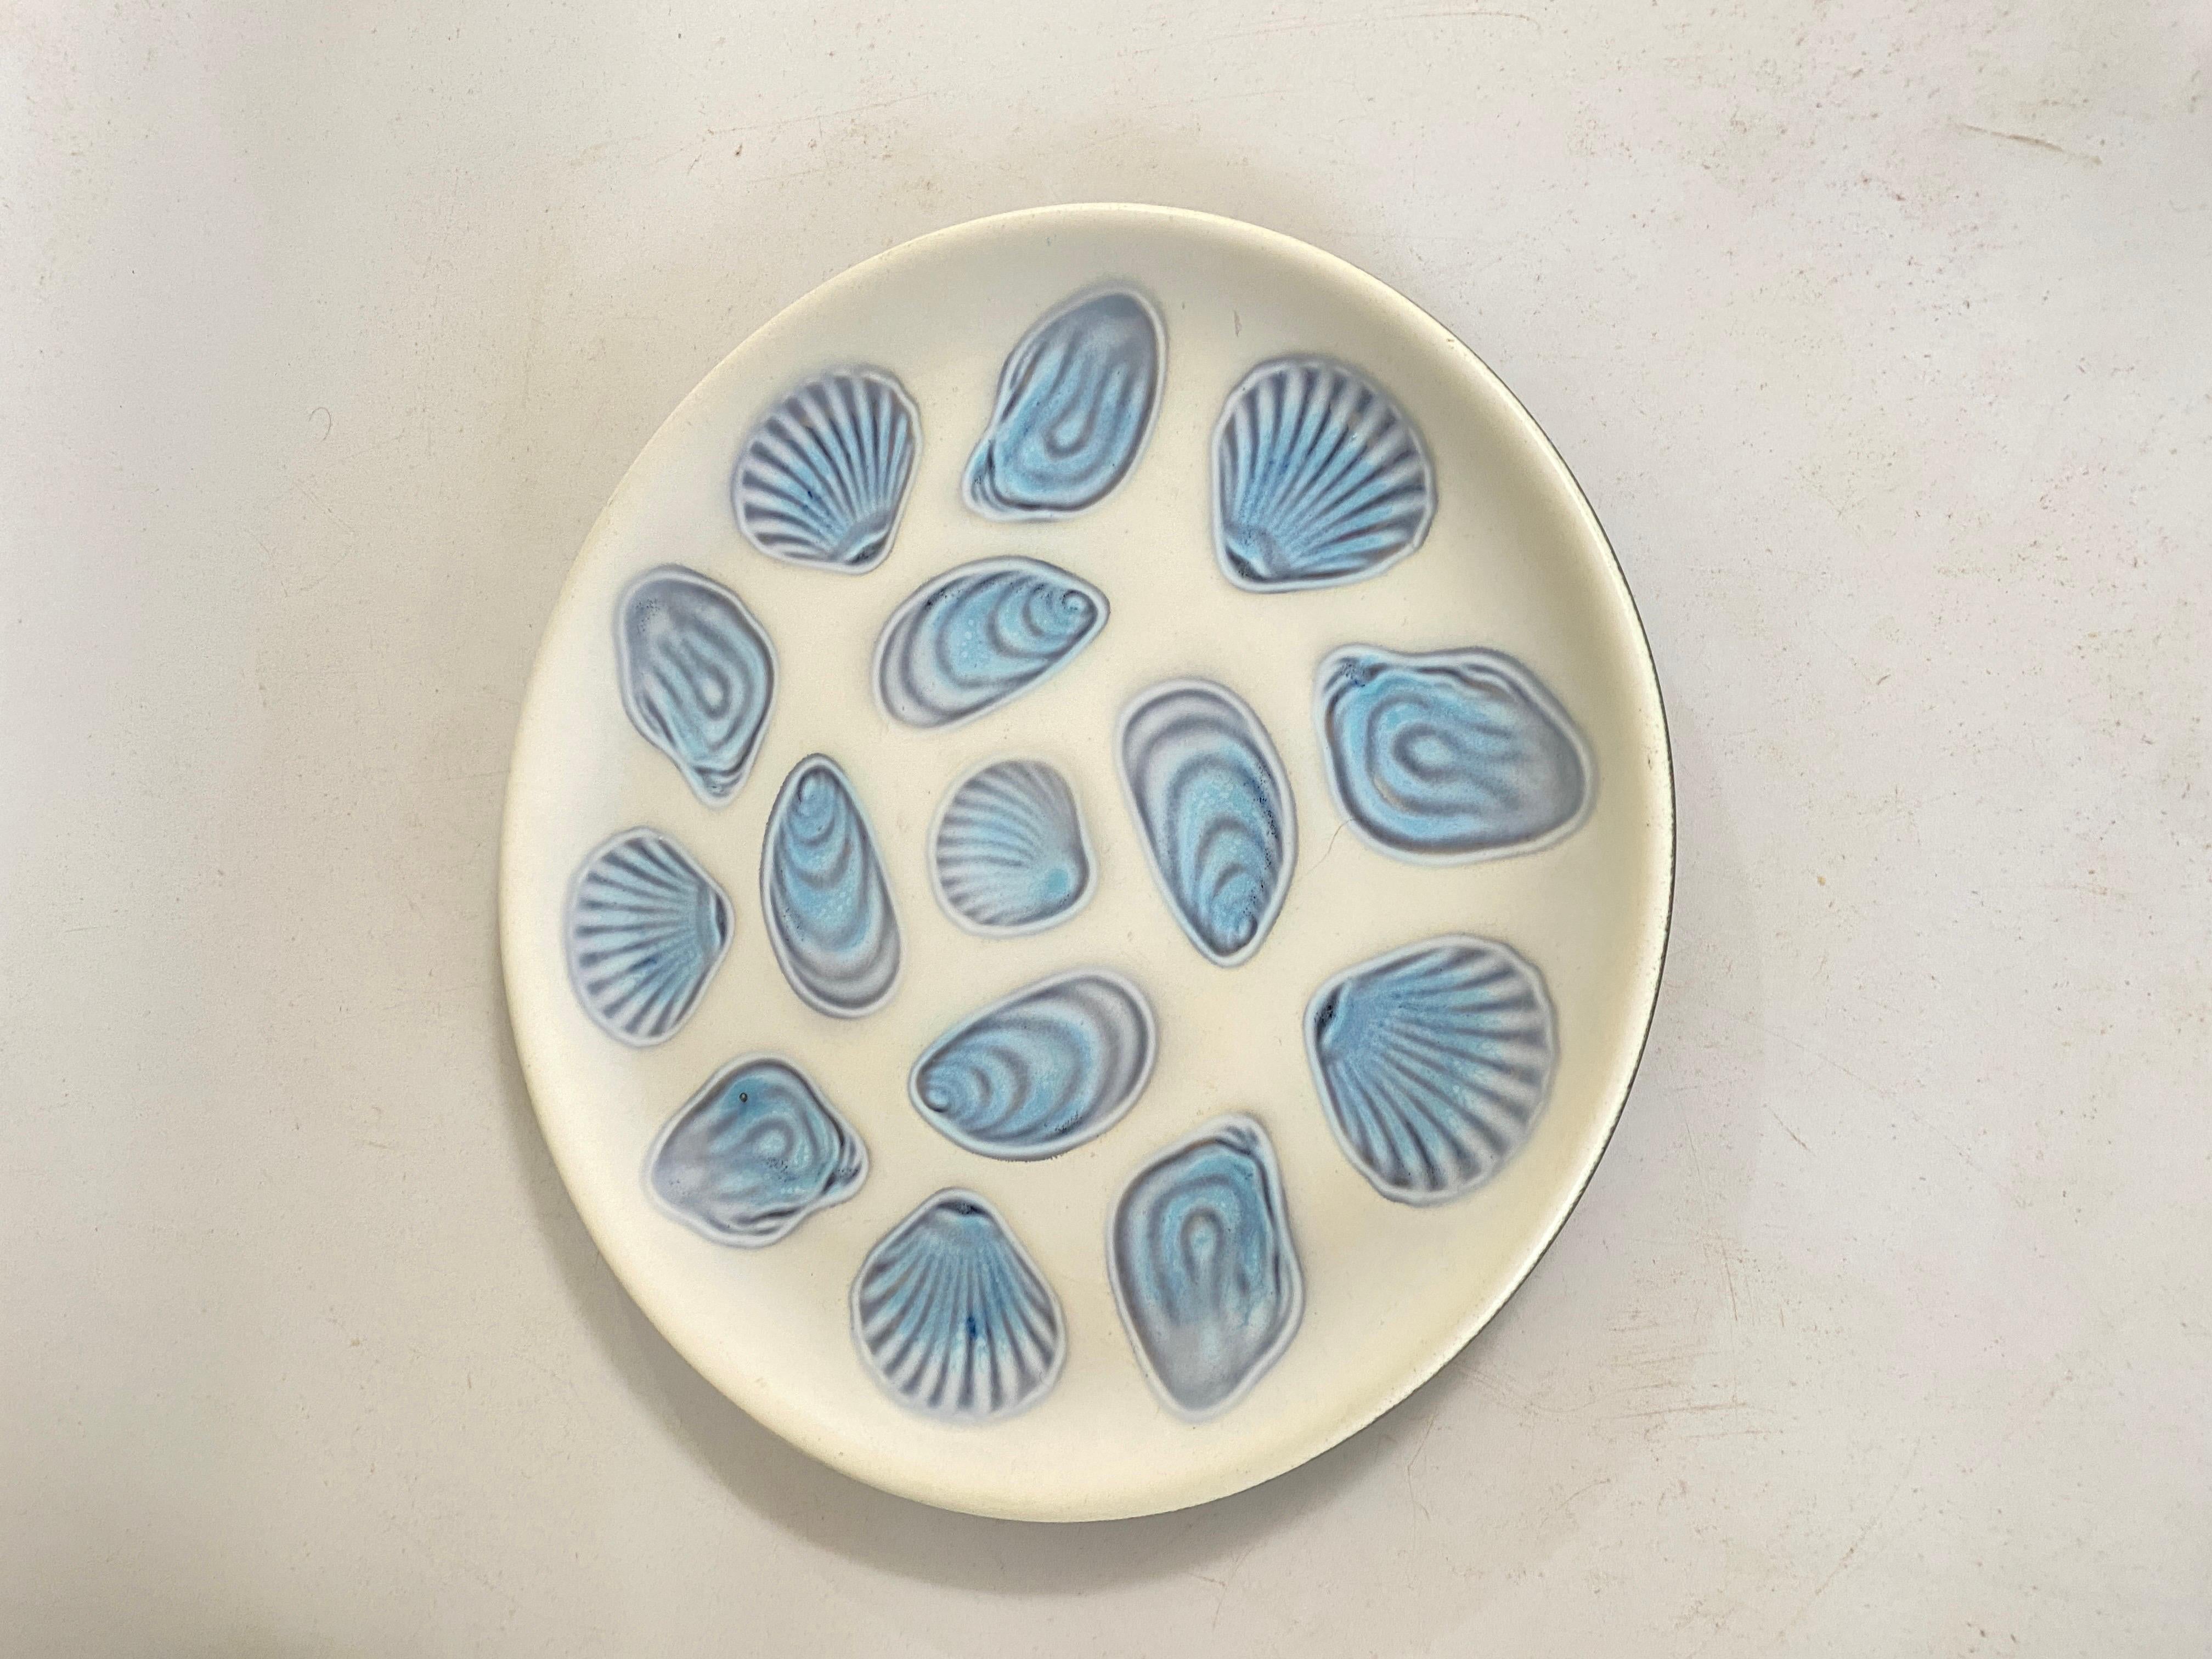 2 Large Oyster Plates and 6 Plates in Ceramic Blue and White France by Elchinger In Good Condition For Sale In Auribeau sur Siagne, FR